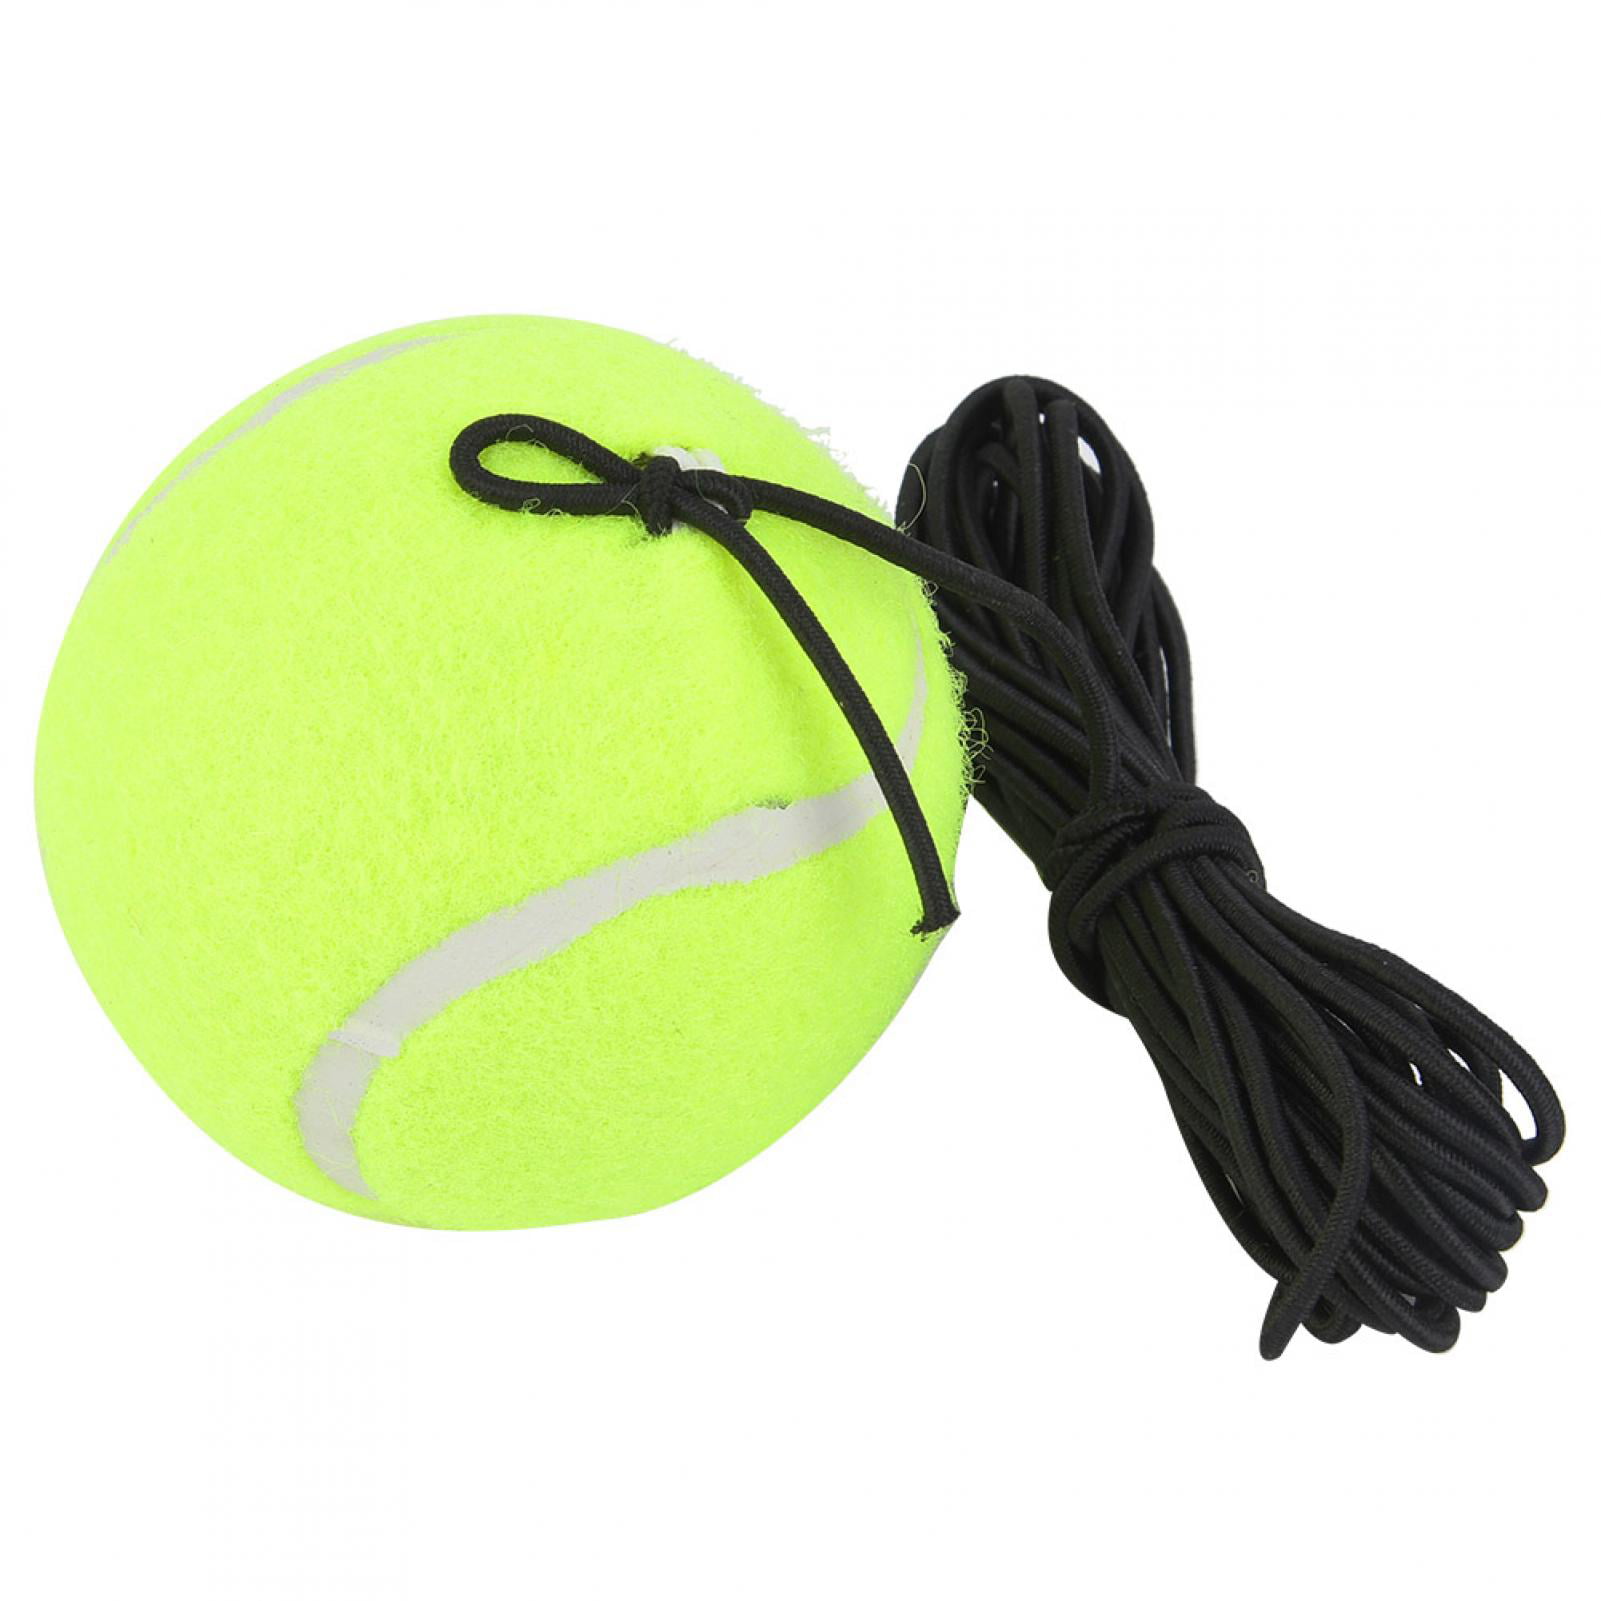 Tennis Ball Back Base Trainer w/ Rubber Elastic Rope for Single Person Practice 